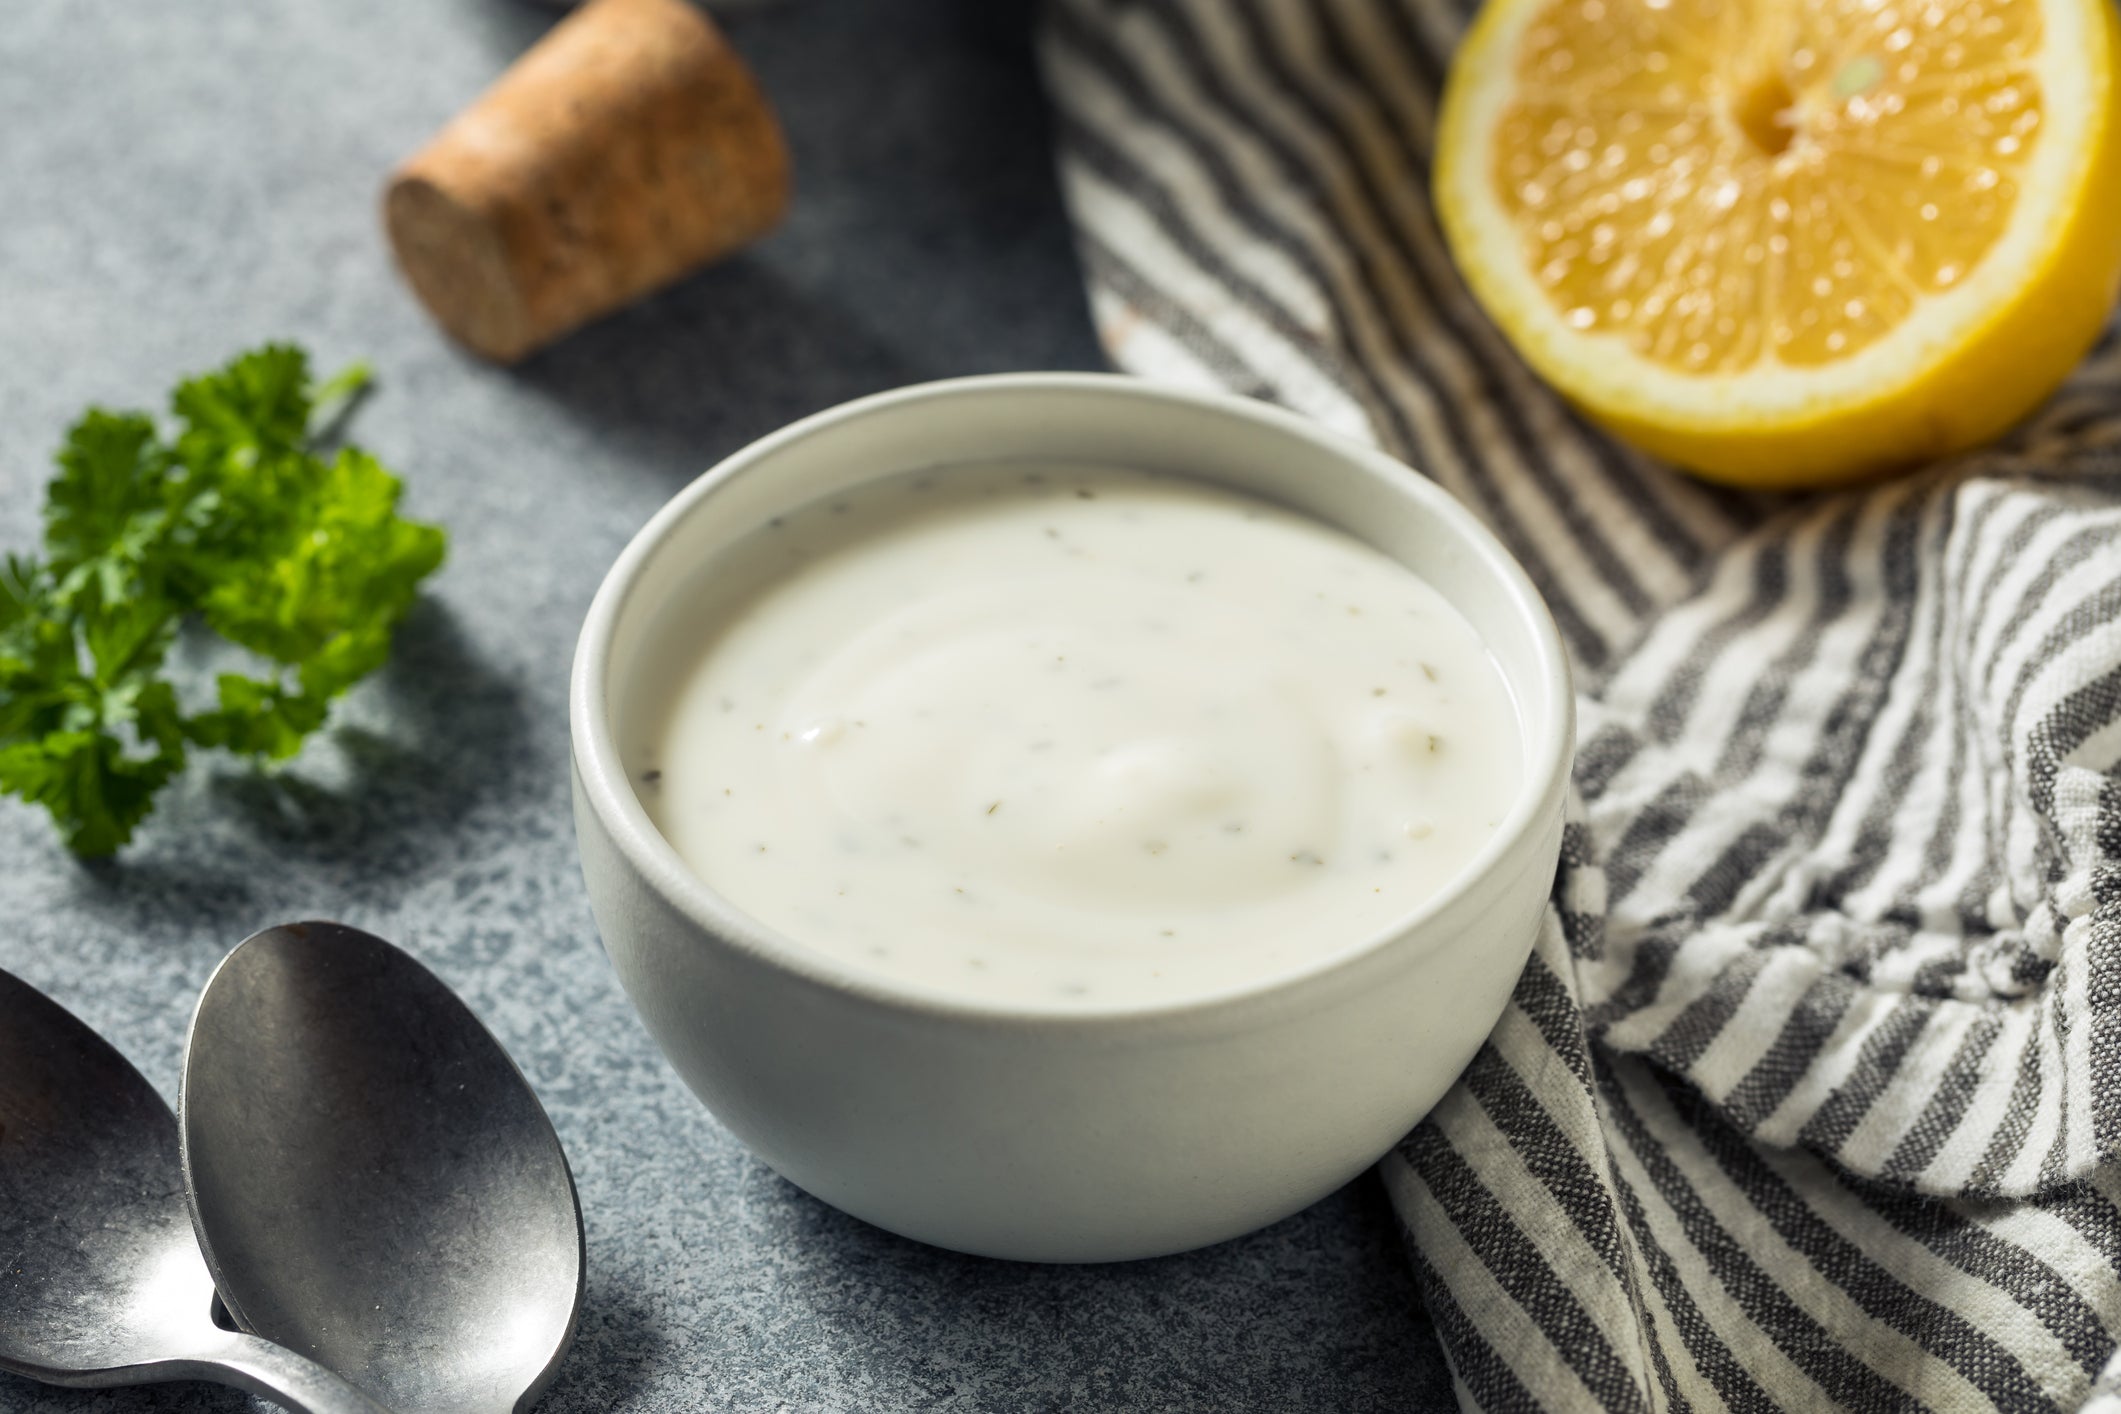 Ranch Replacement Dressing